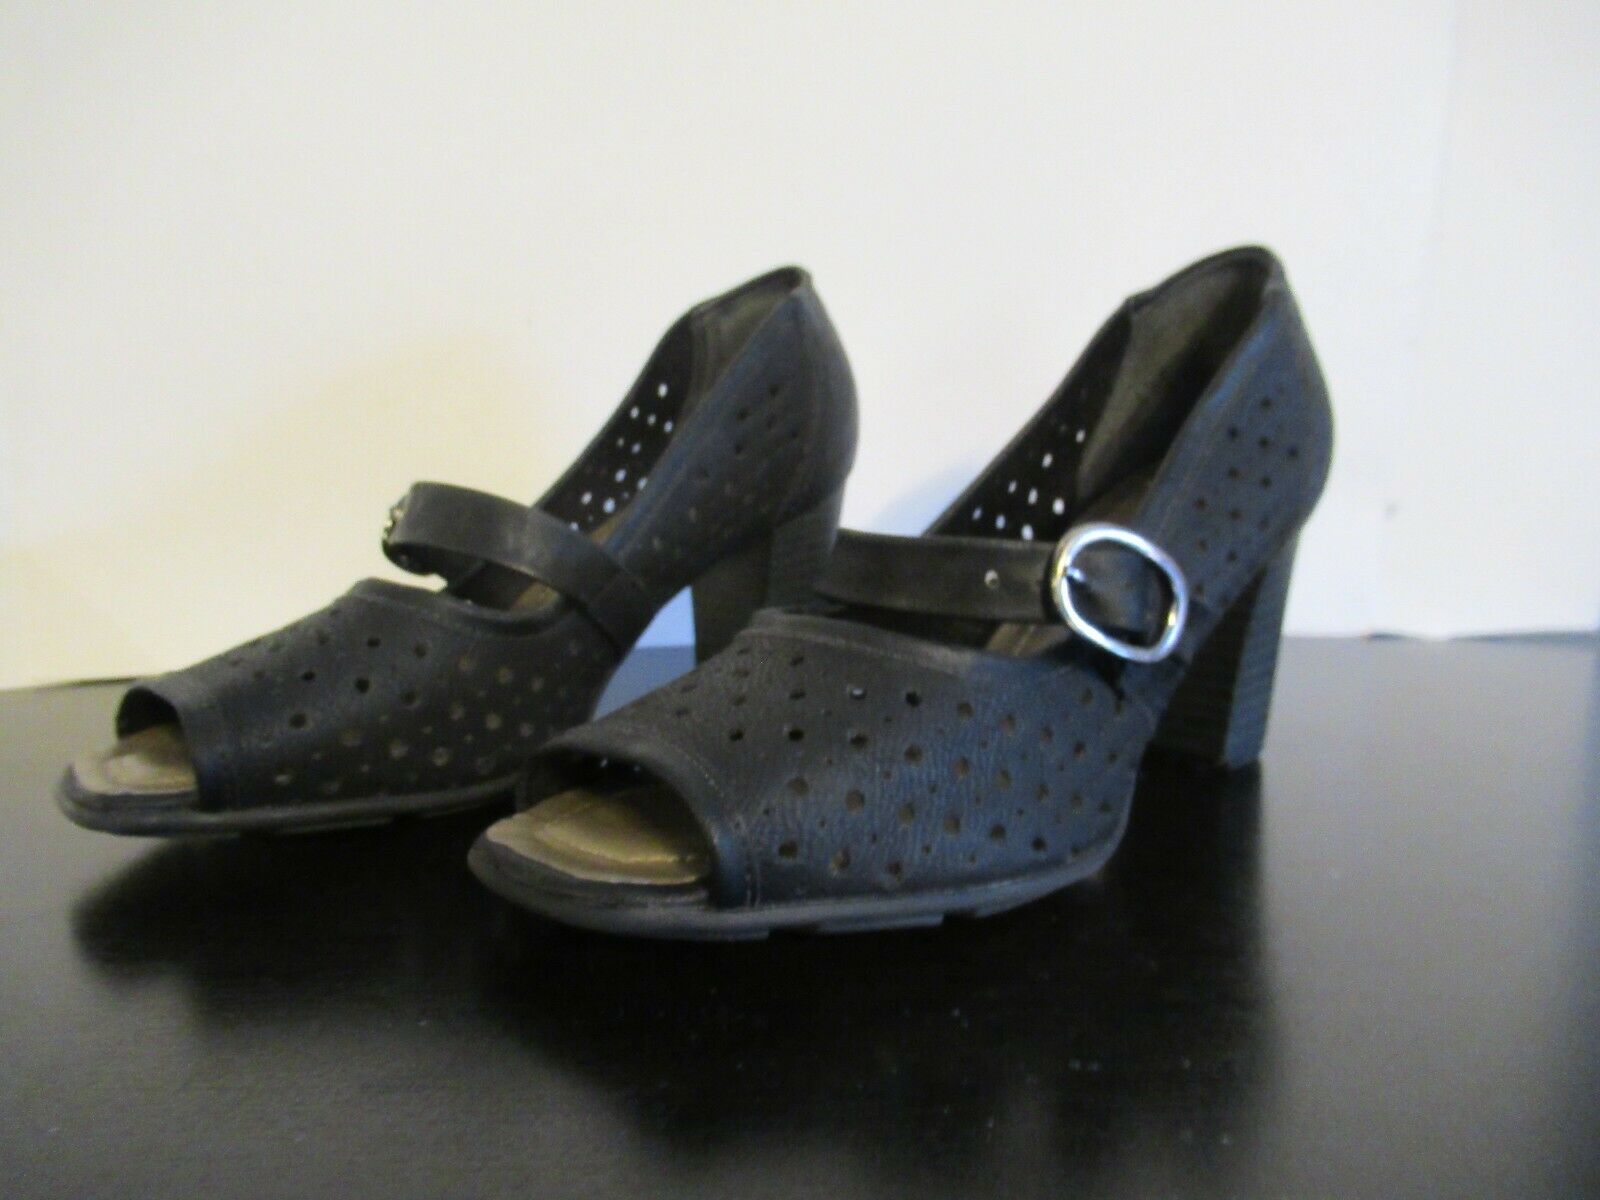 Piccadilly Brasil USA size 6 with cut out toe and 2 1/2" heel in black ON SALE